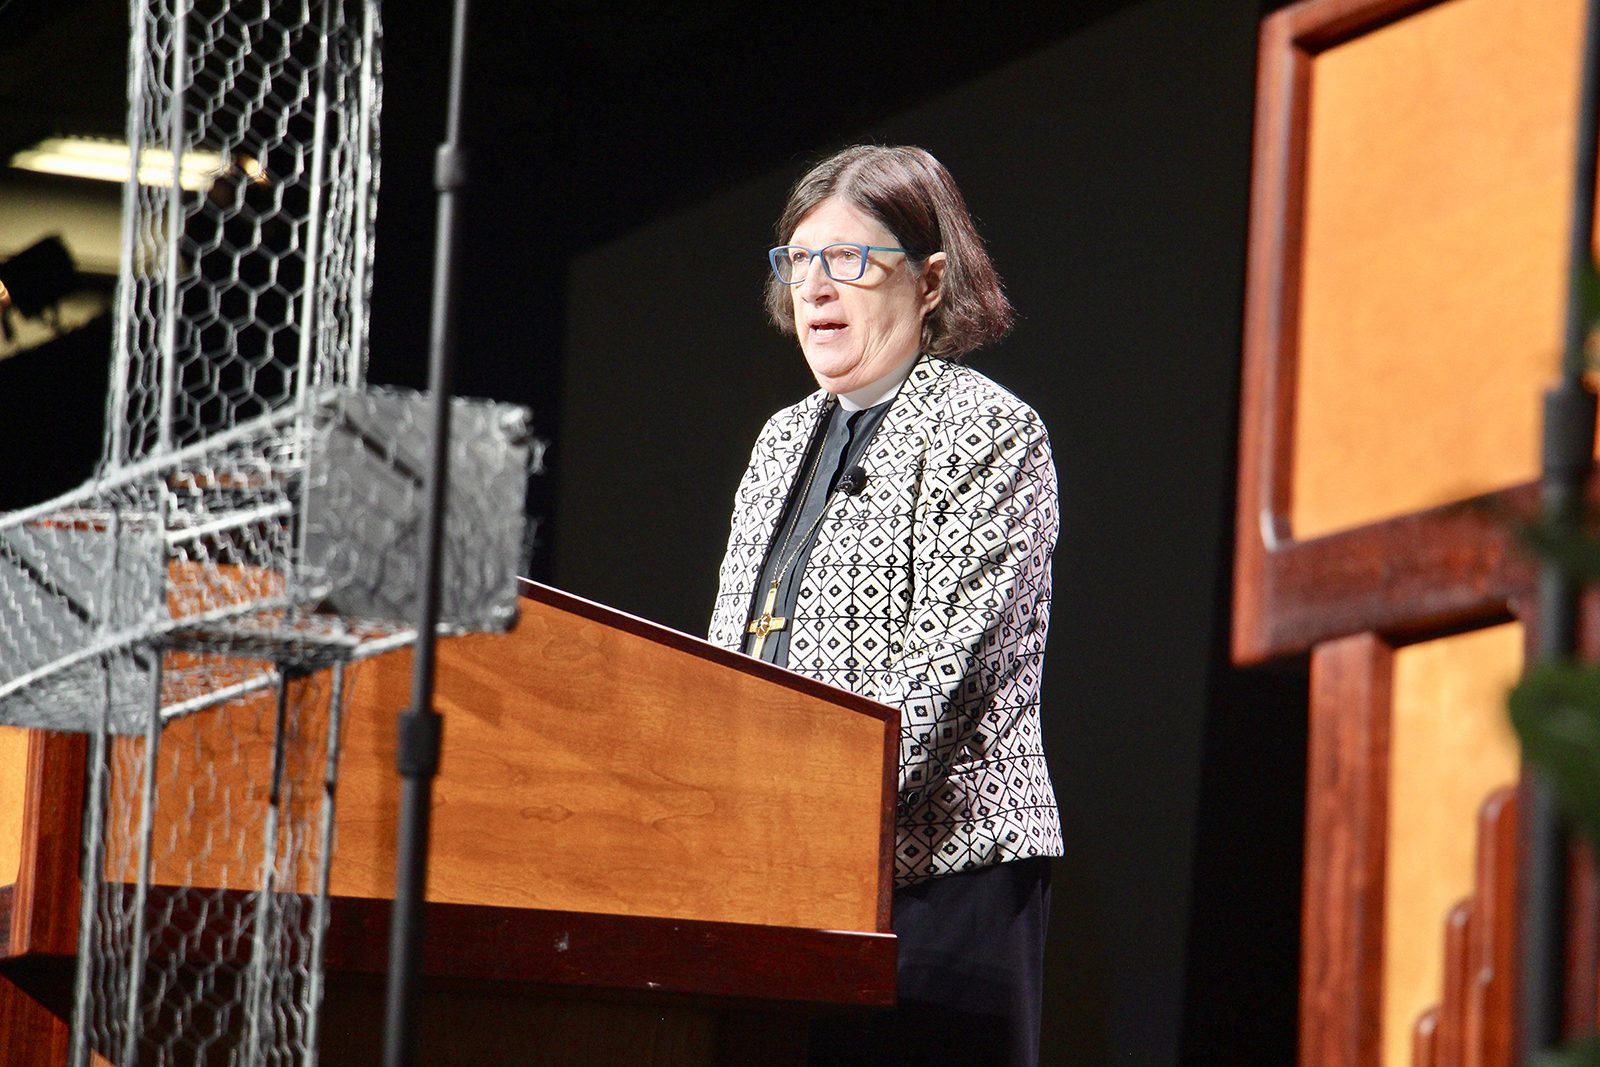 Presiding Bishop Elizabeth Eaton speaks during the ELCA Churchwide Assembly at the Greater Columbus Convention Center in Columbus, Ohio, Tuesday, Aug. 9, 2022. RNS photo by Emily McFarlan Miller